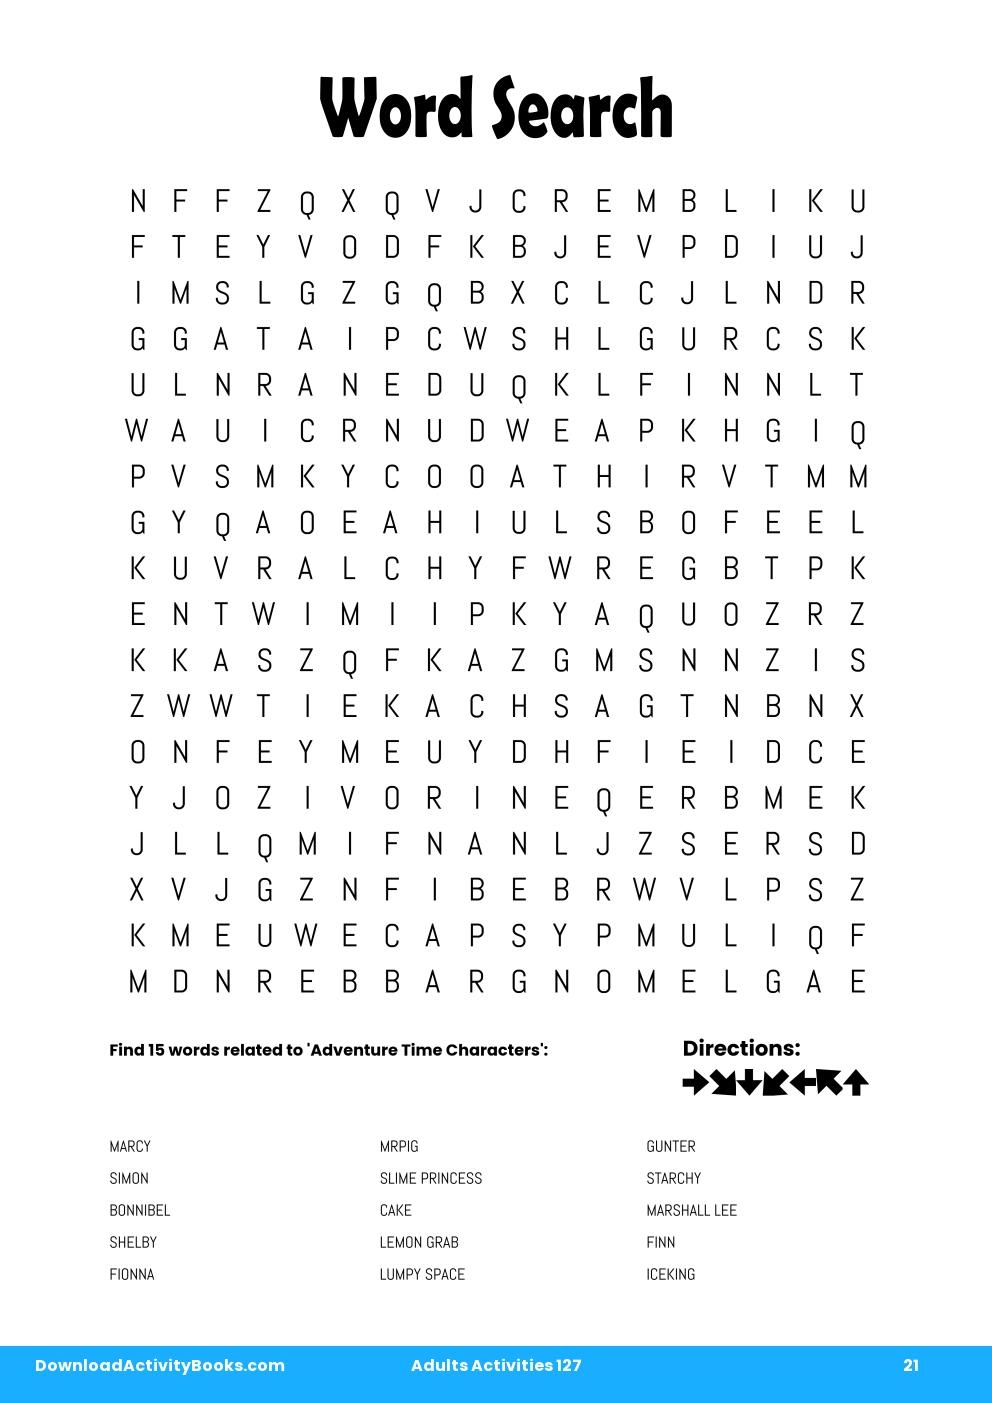 Word Search in Adults Activities 127